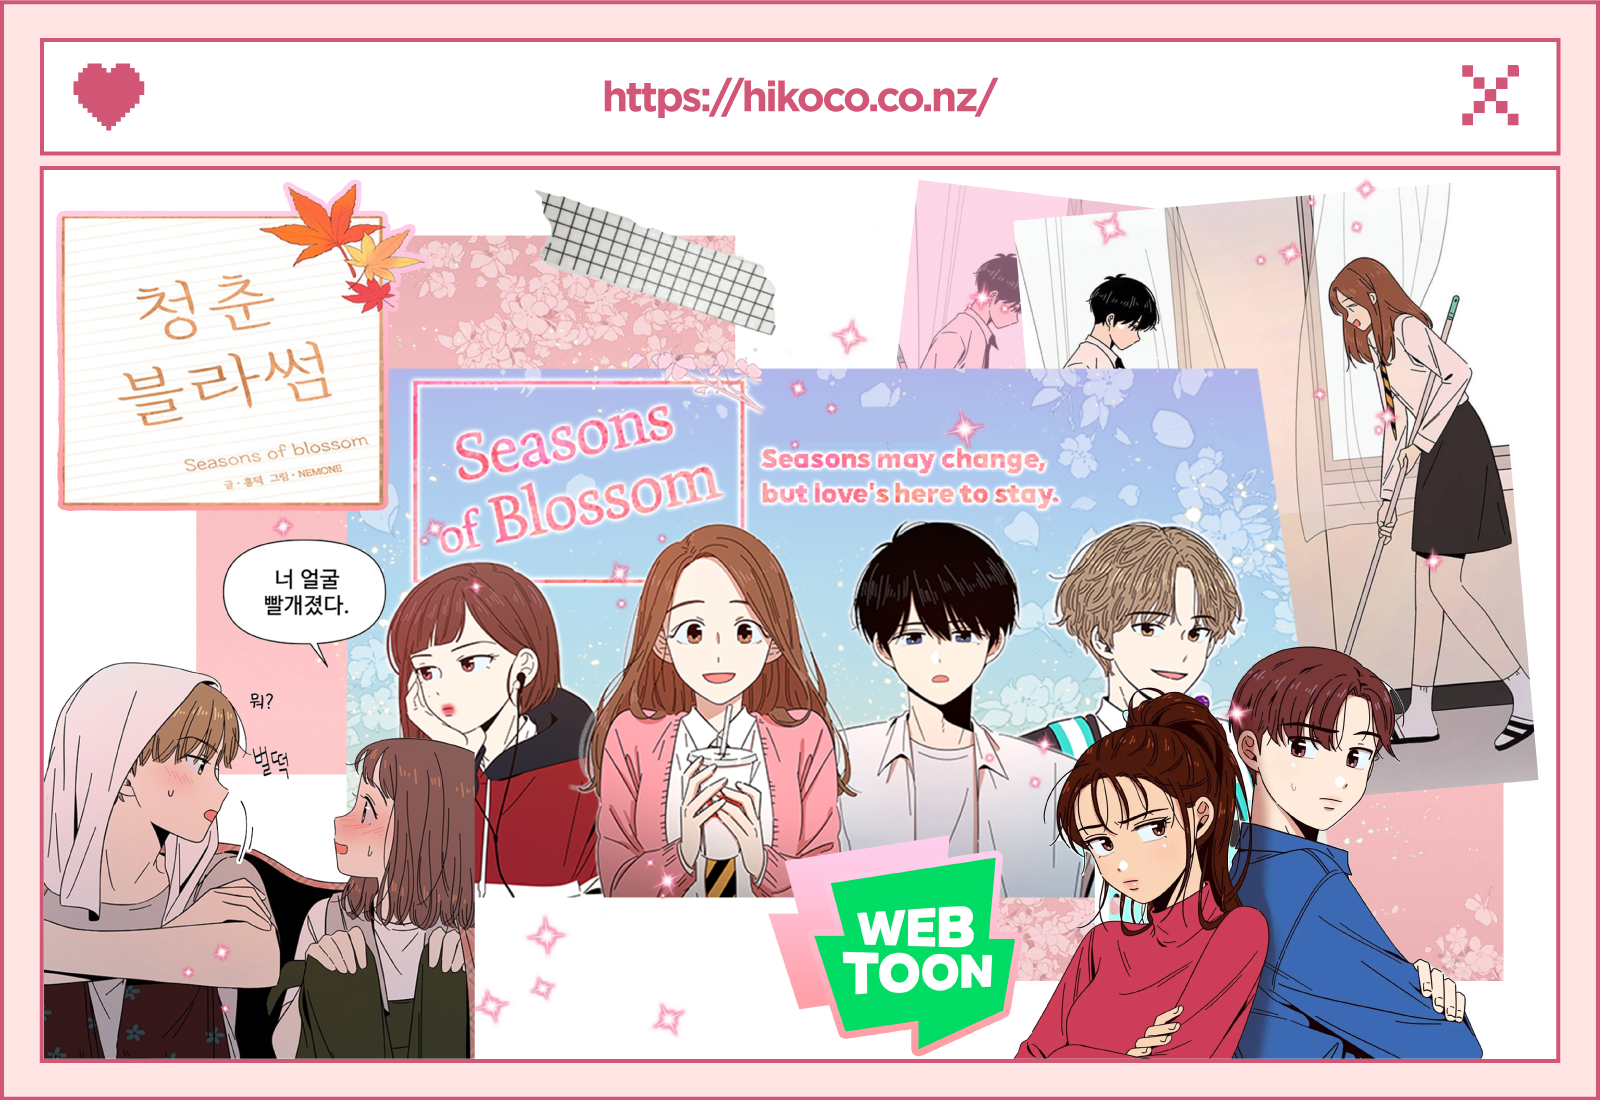 WEBTOON: "Oh, to be young and in love."